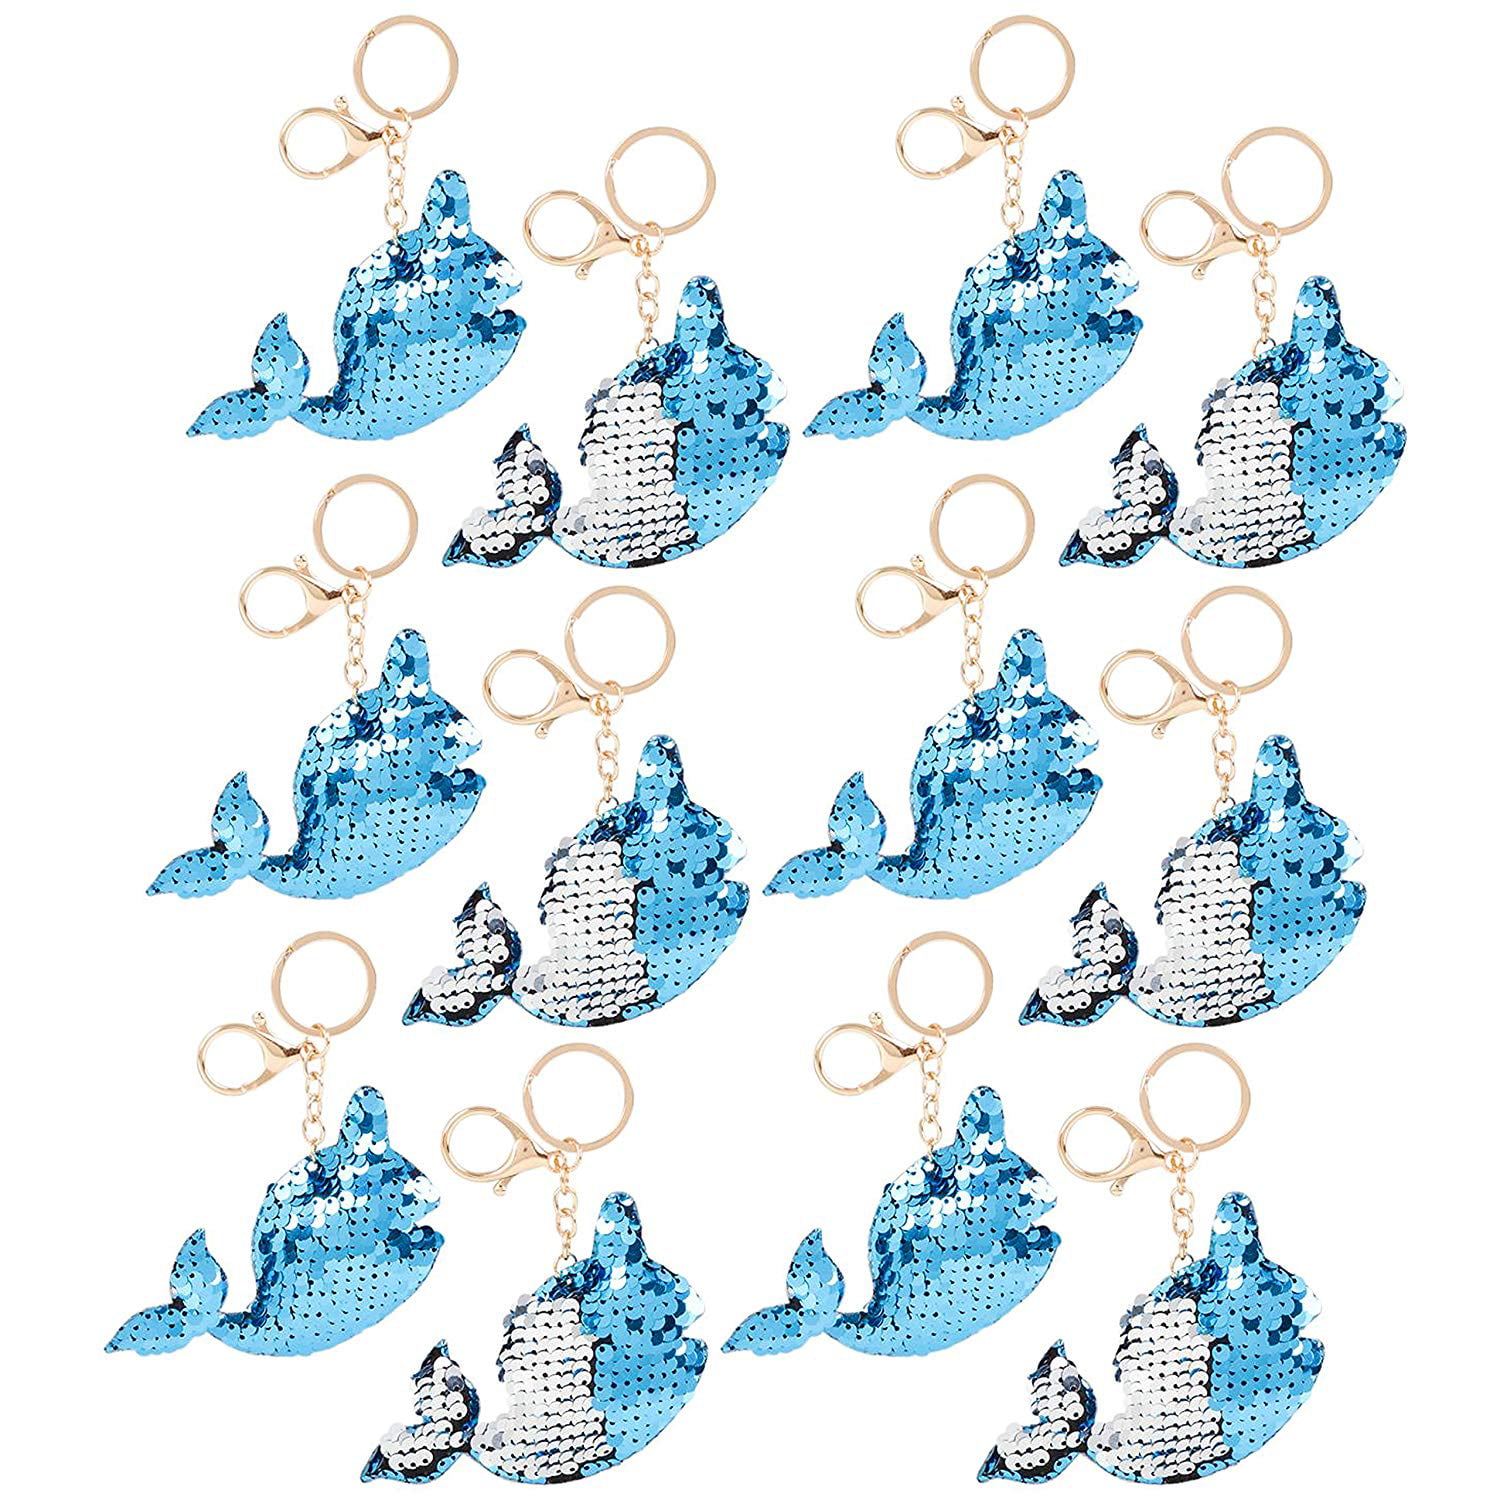 Blue & Silver - 2.5 inch FLIP SEQUIN NARWHAL KEYCHAIN Generic Value Plush 